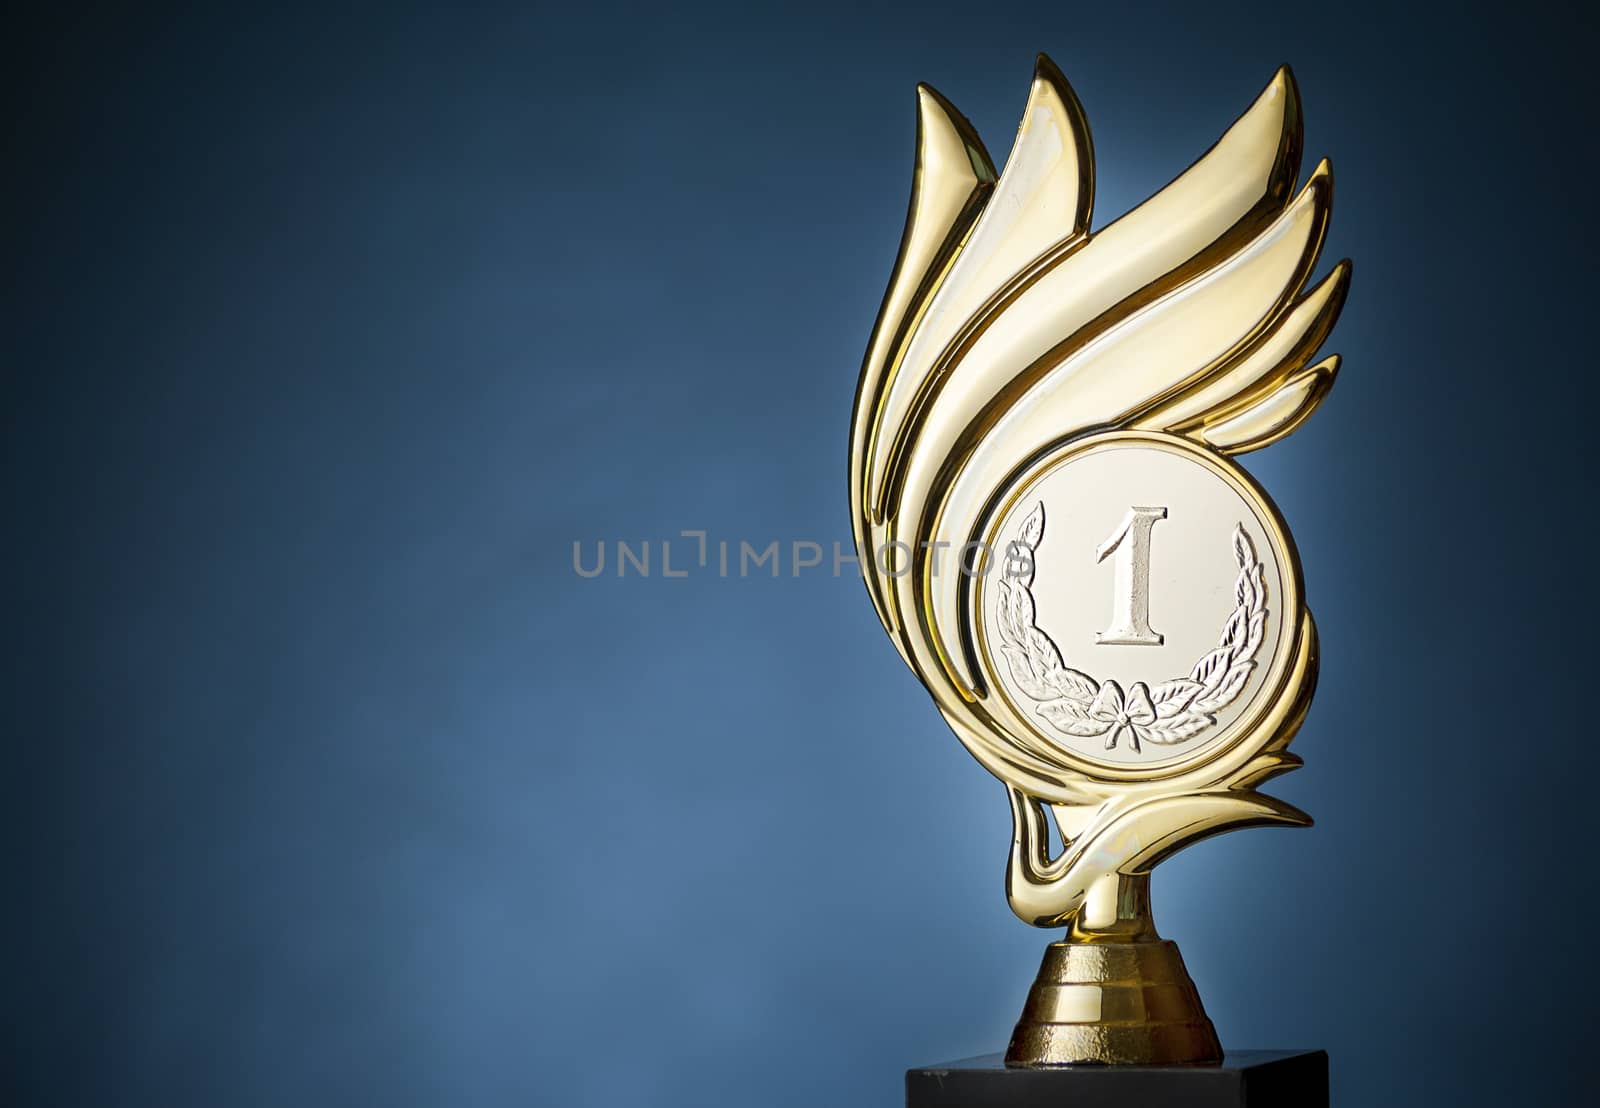 Gold flame style championship trophy for the first place winner over a blue background with copy space